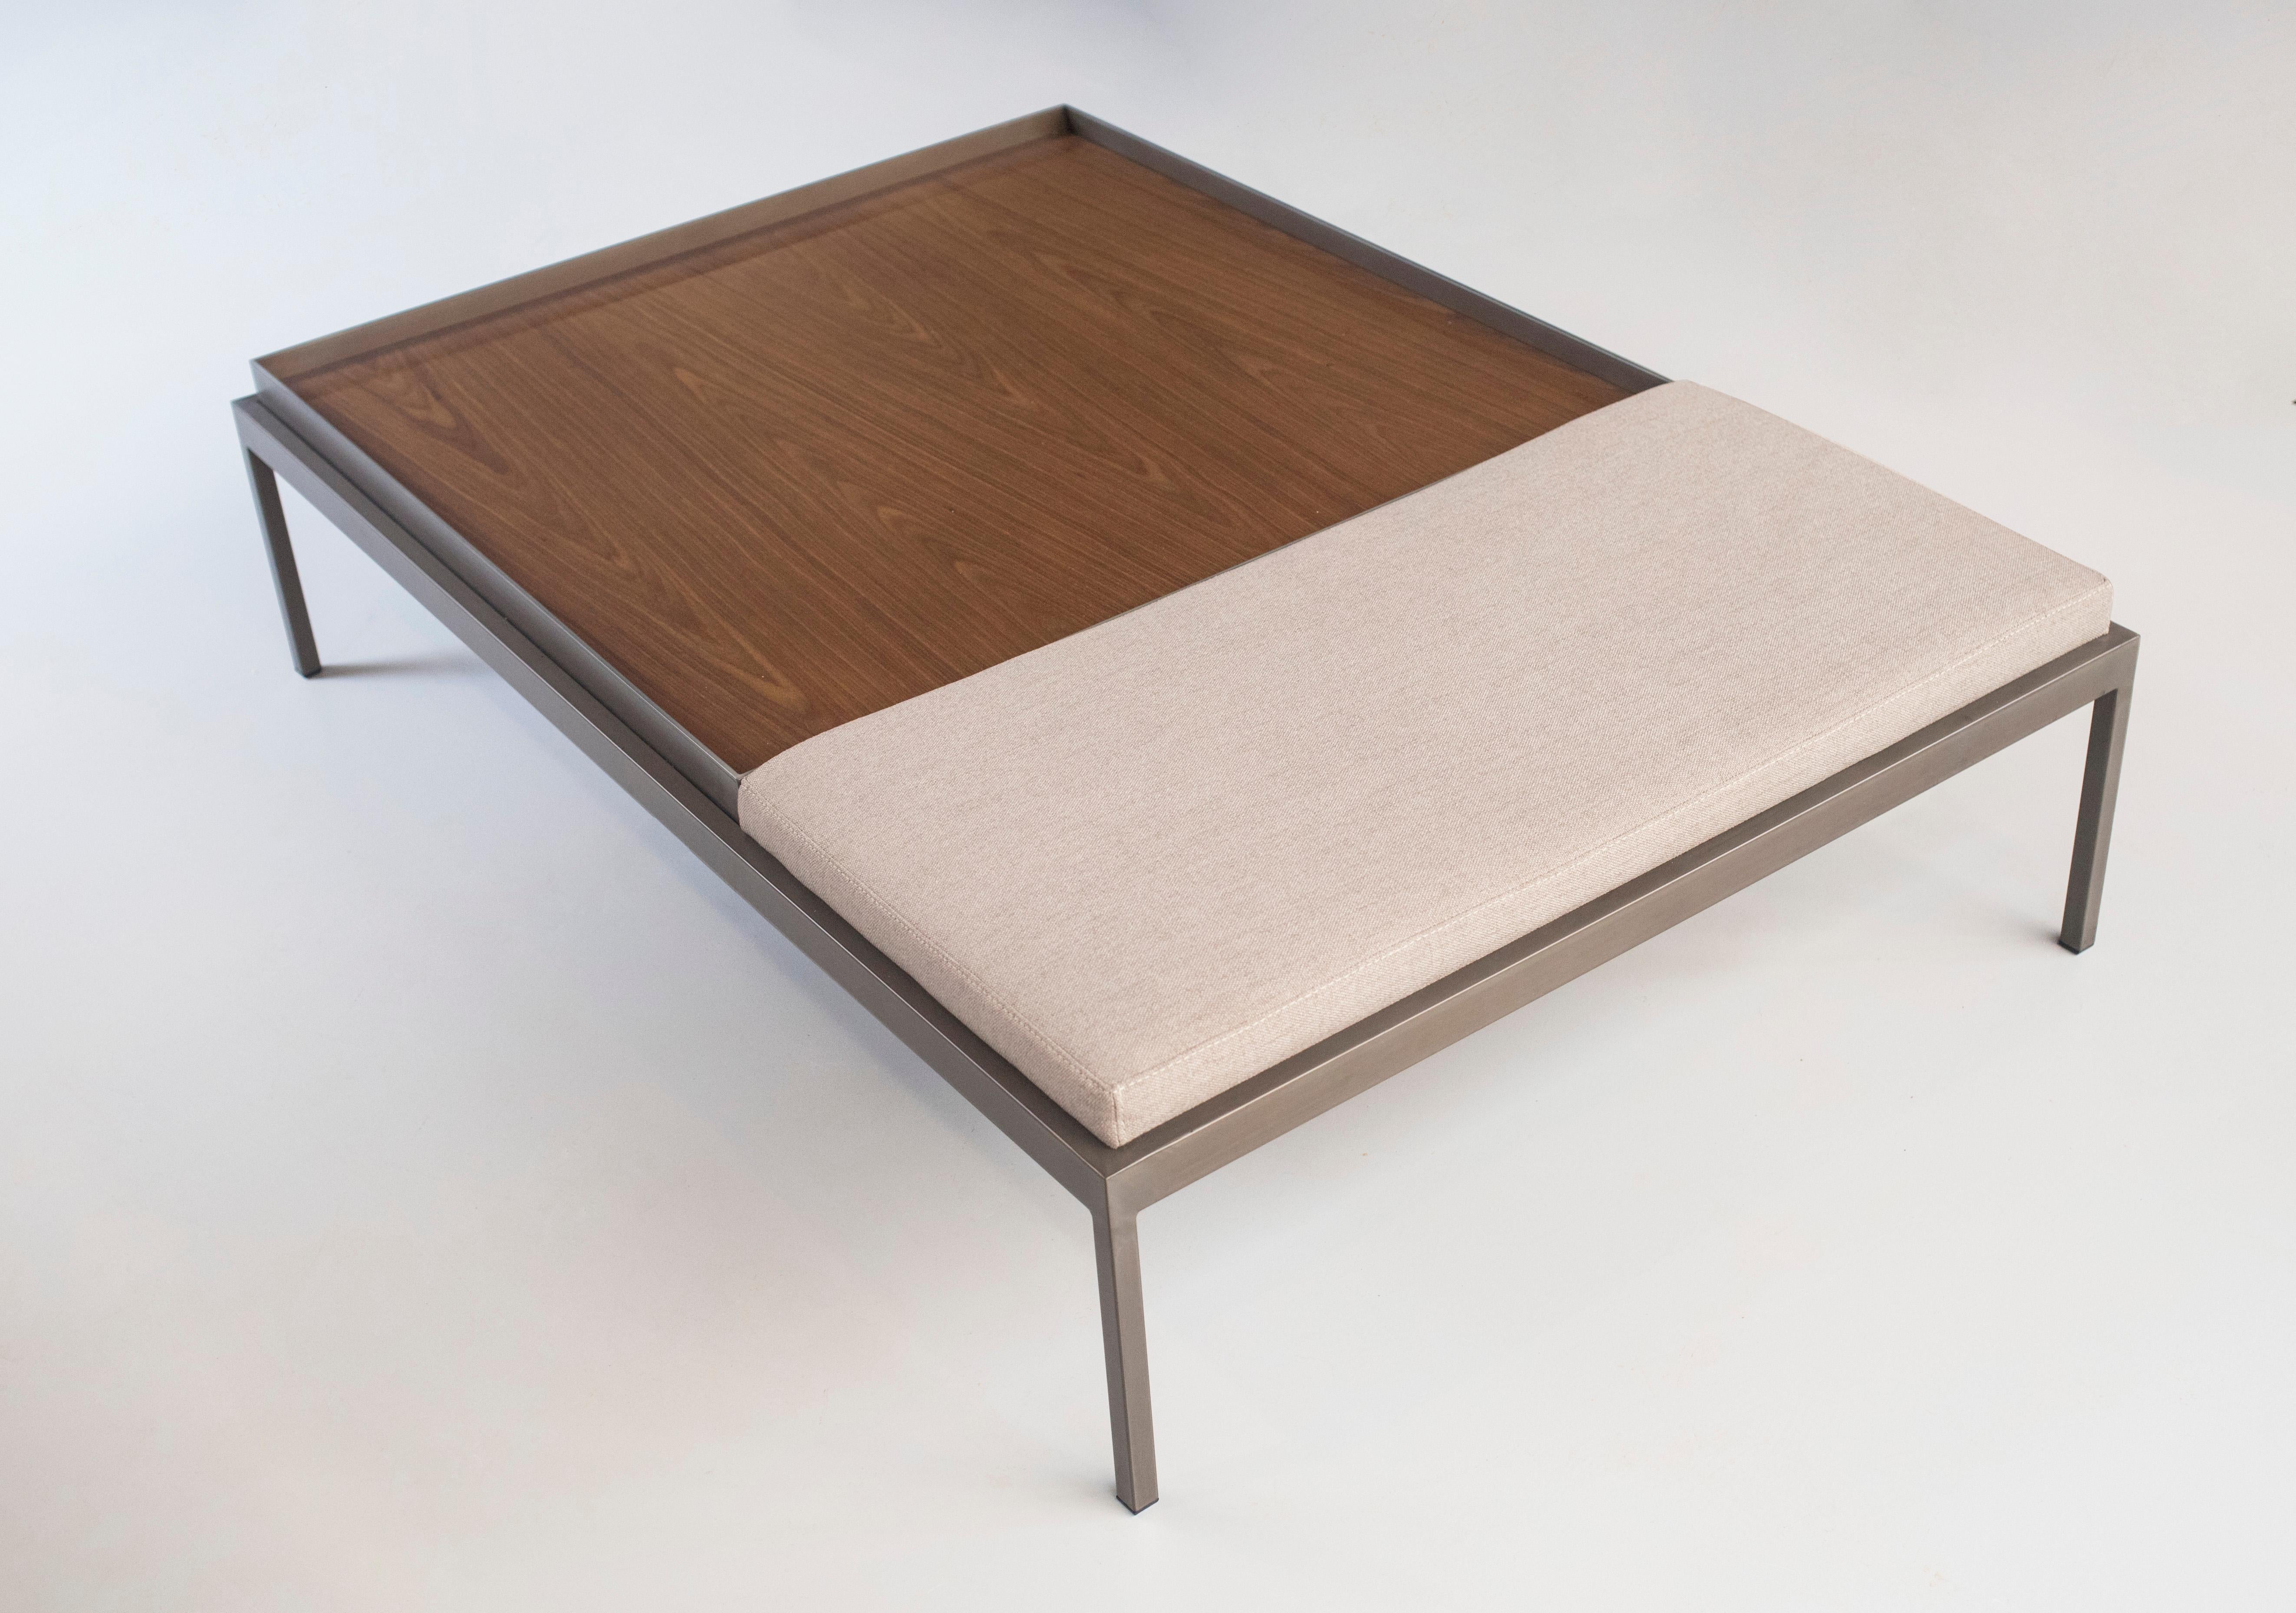 White Coffee Table by Doimo Brasil
Dimensions:  W 140 x D 95 x H 34 cm 
Materials: Base: Aged steel, Seat: Fabric, Top: Veneer.


With the intention of providing good taste and personality, Doimo deciphers trends and follows the evolution of man and